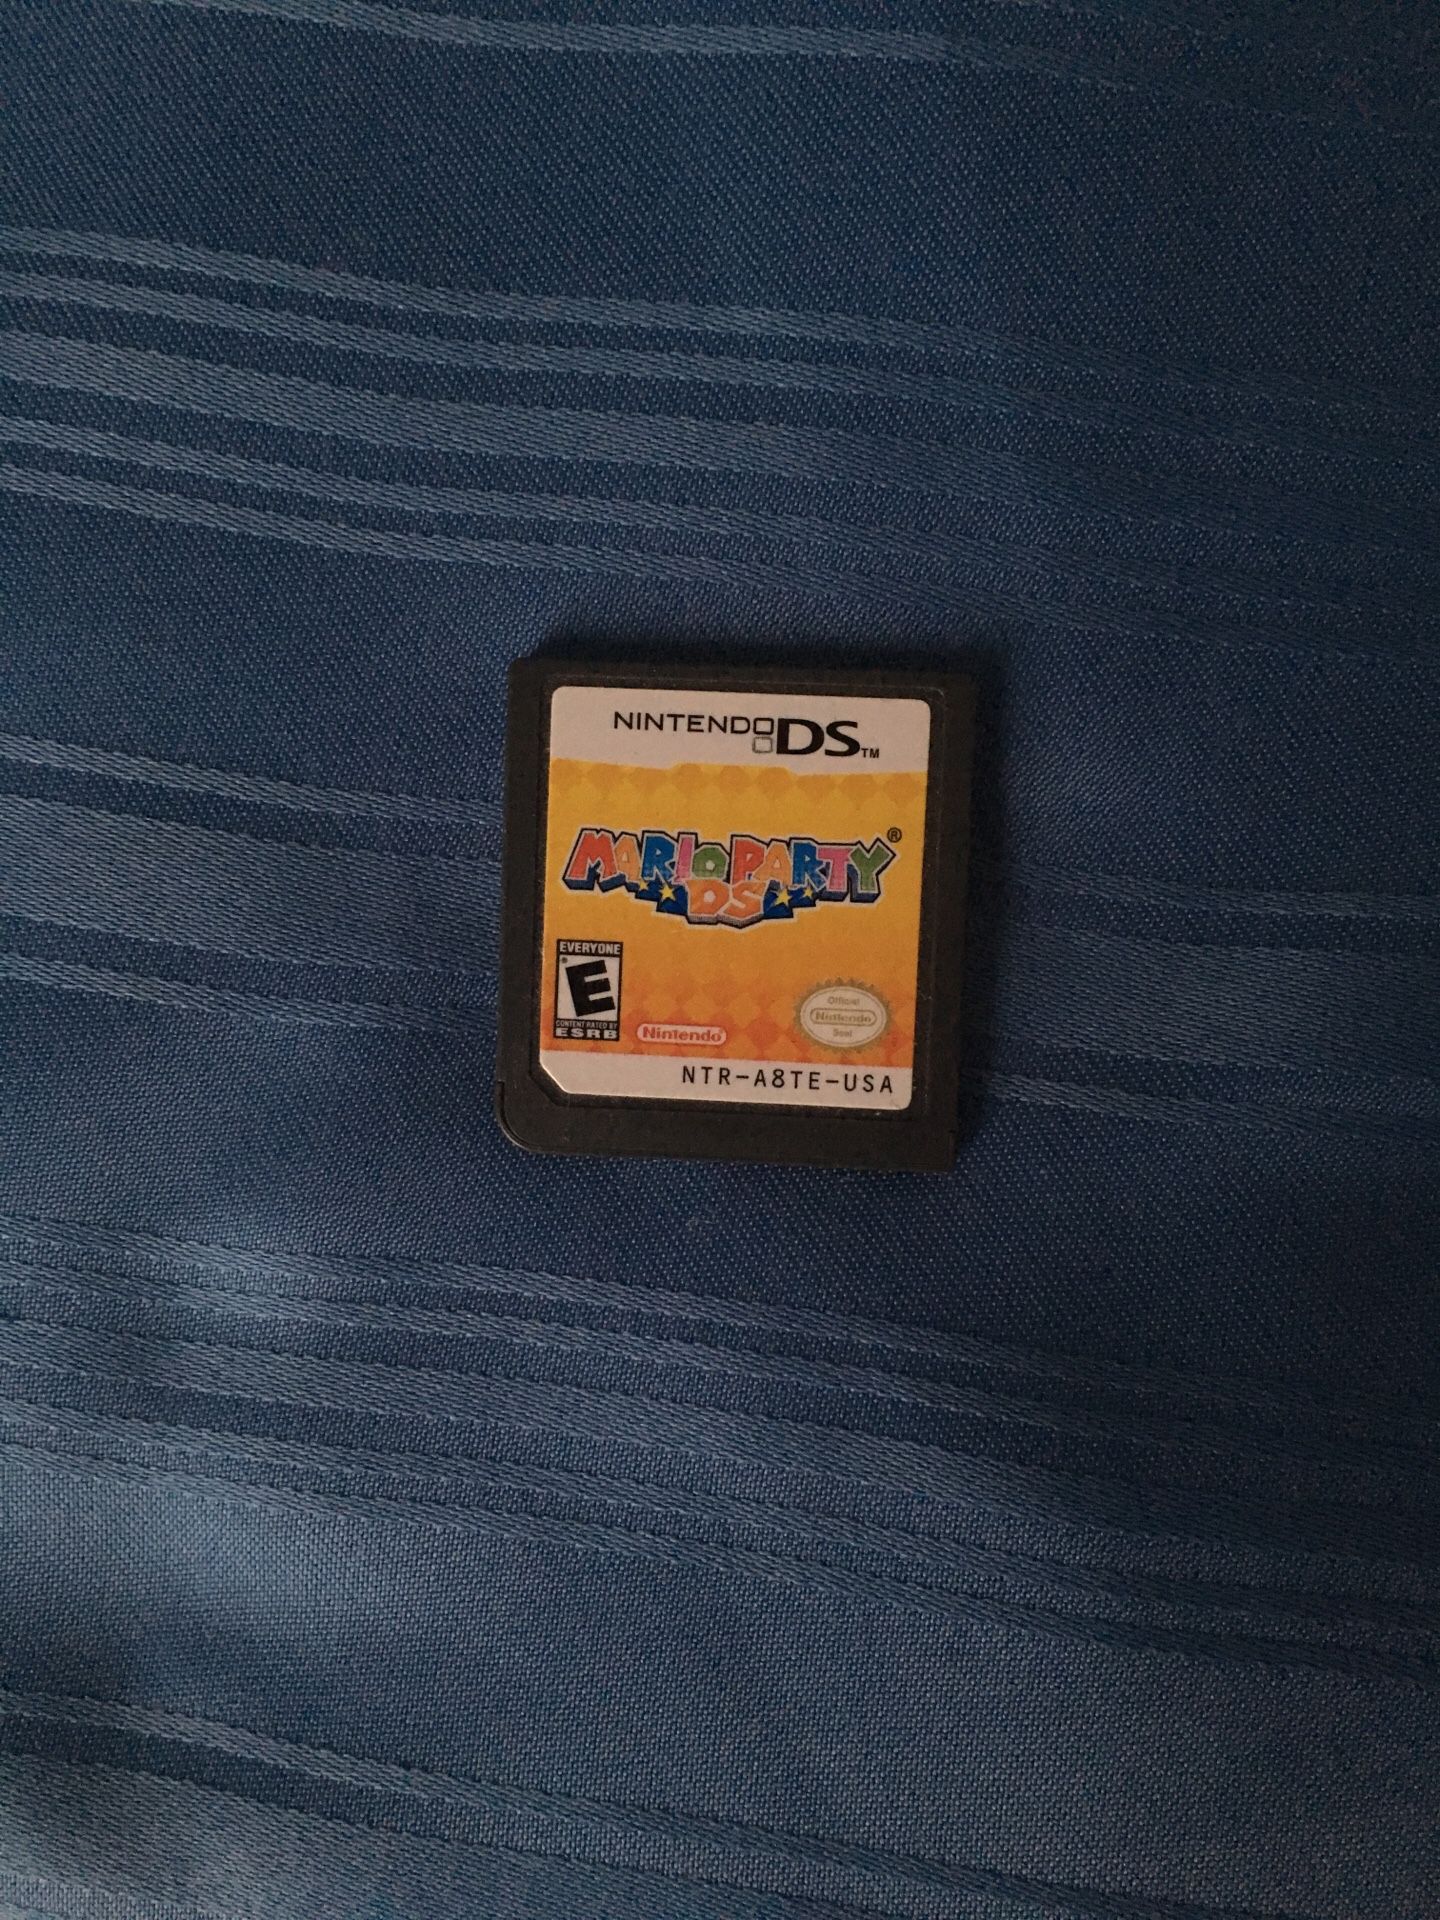 Mario Party DS Game for Nintendo DS/3DS